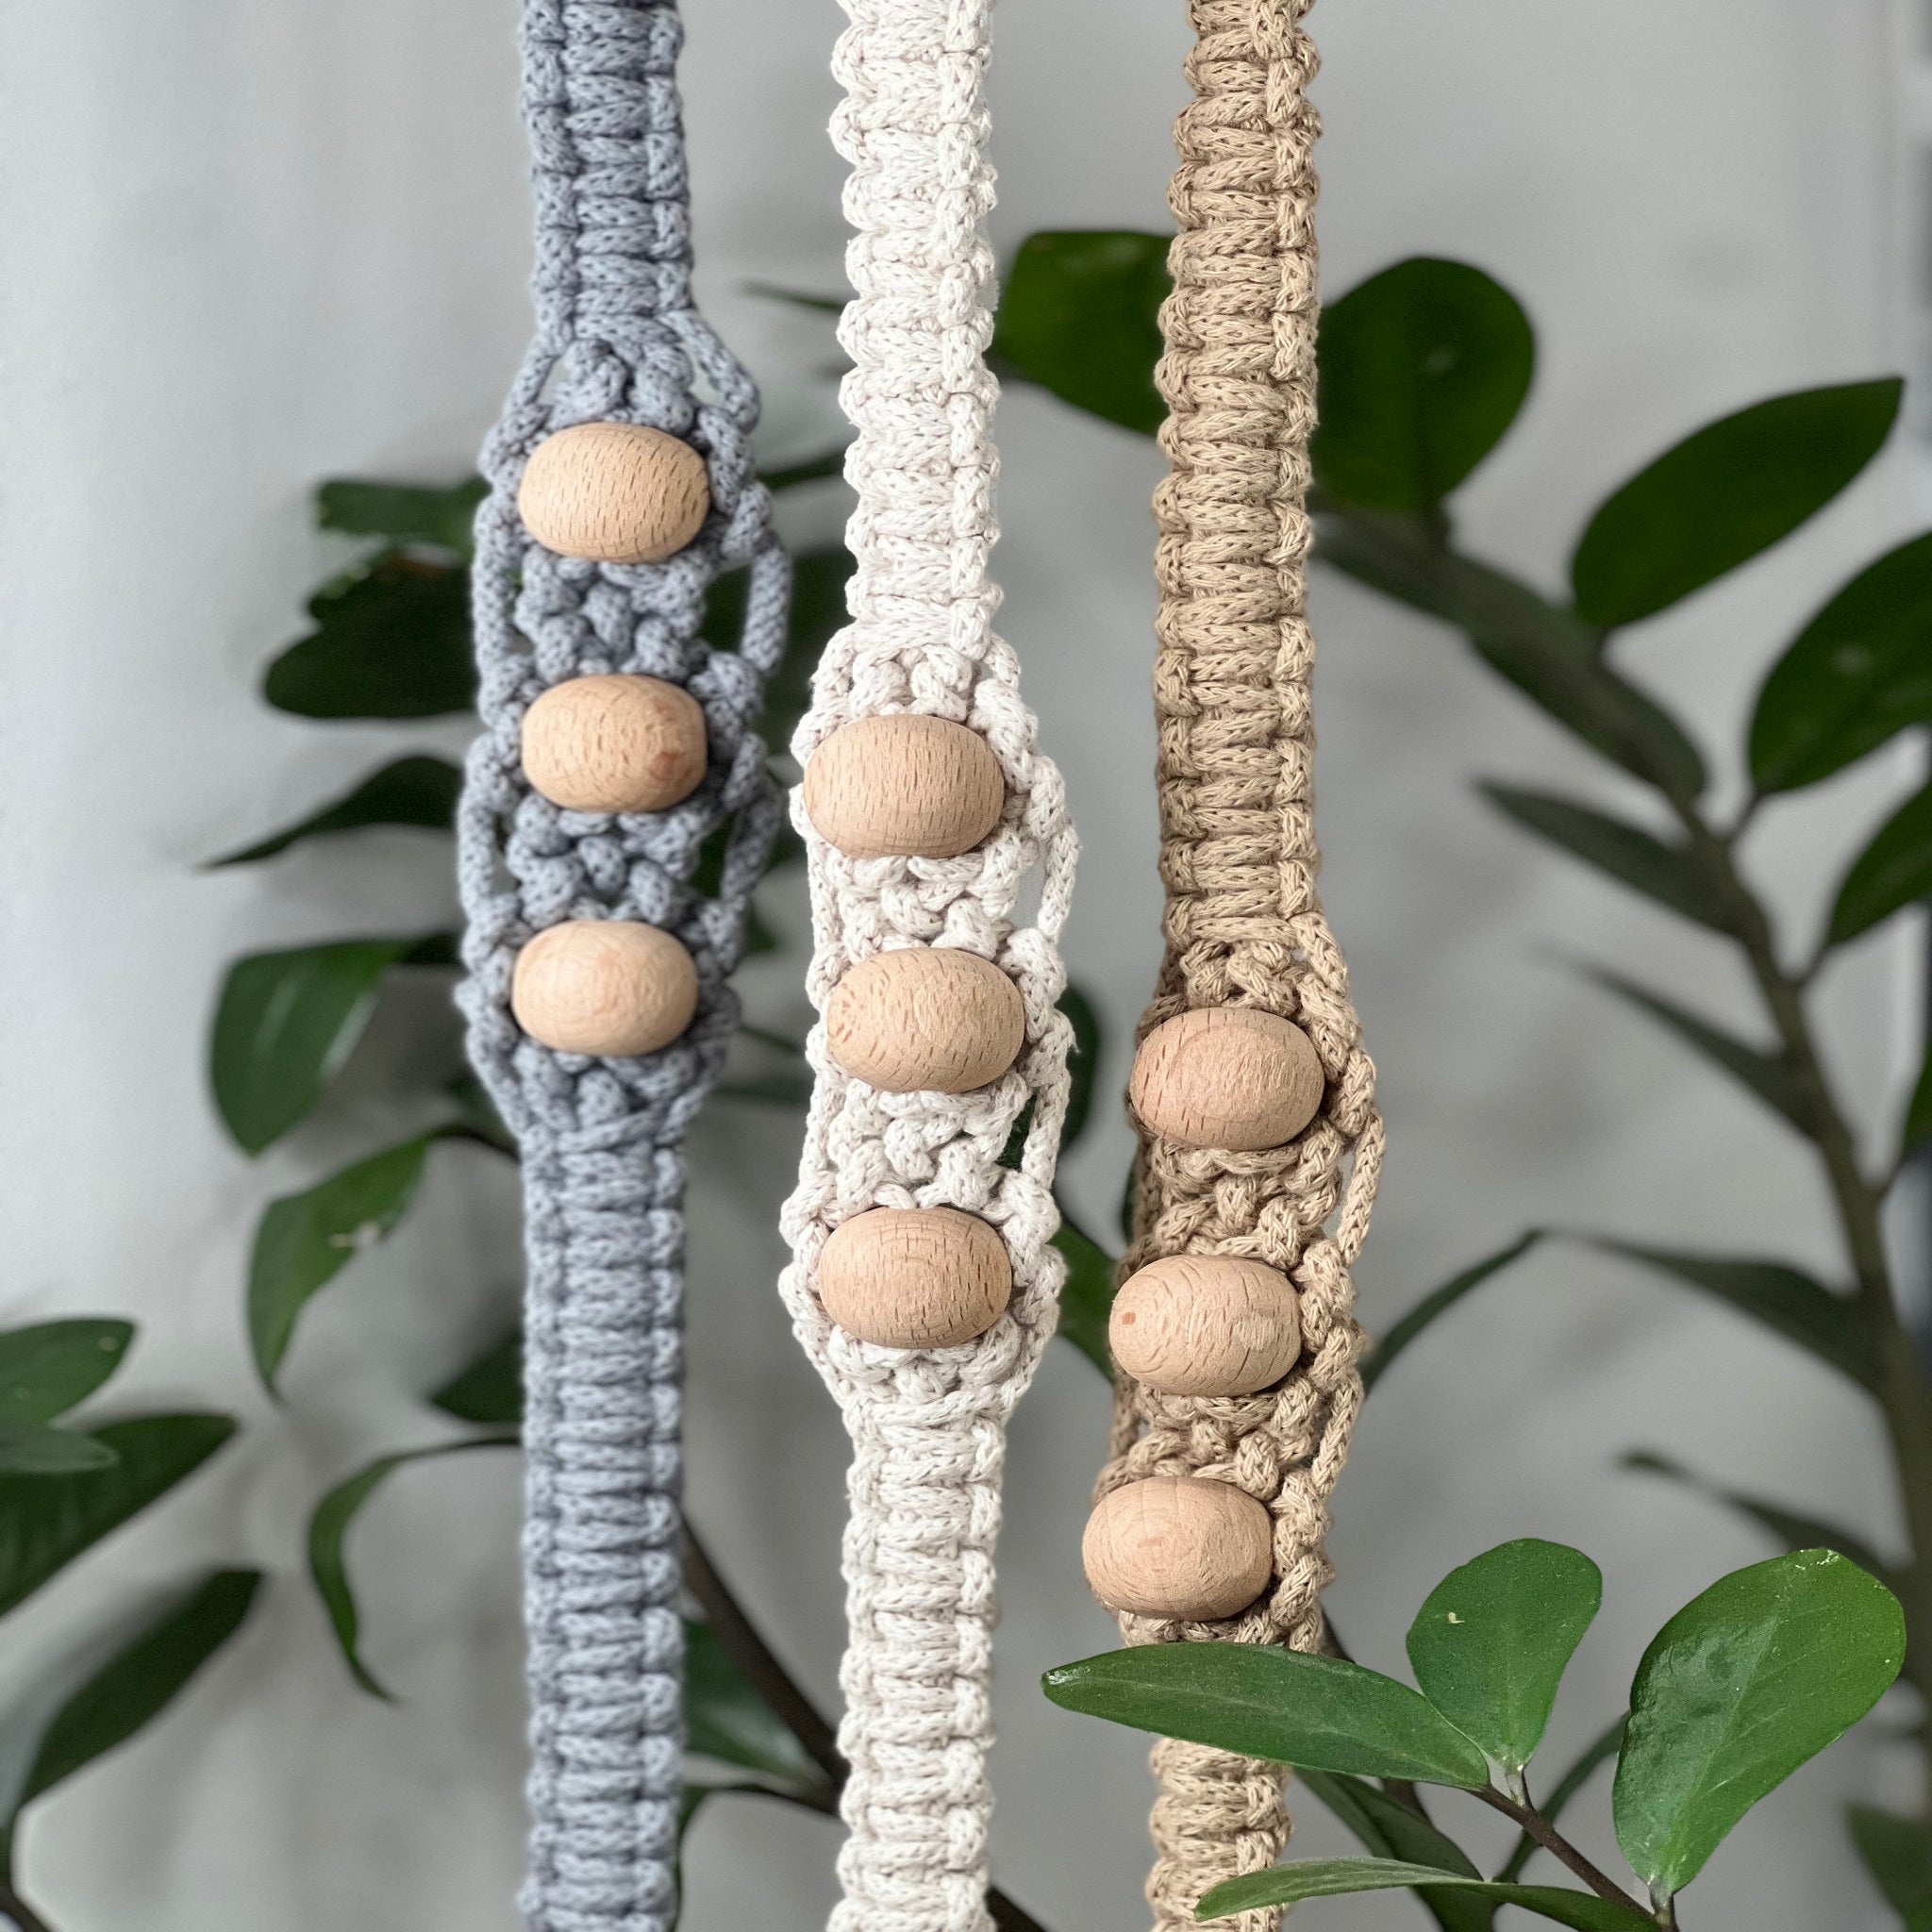 DVAAR YOGA MAT CARRIER STRAPS MACRAME YOGA MAT HOLDERS 100% COTTON WASHABLE ,TRENDY GIFT, HANDMADE AND ECO FRIENDLY AVAILABLE IN BEAUTIFUL LIGHT SHADES -BLISSFUL BEIGE.